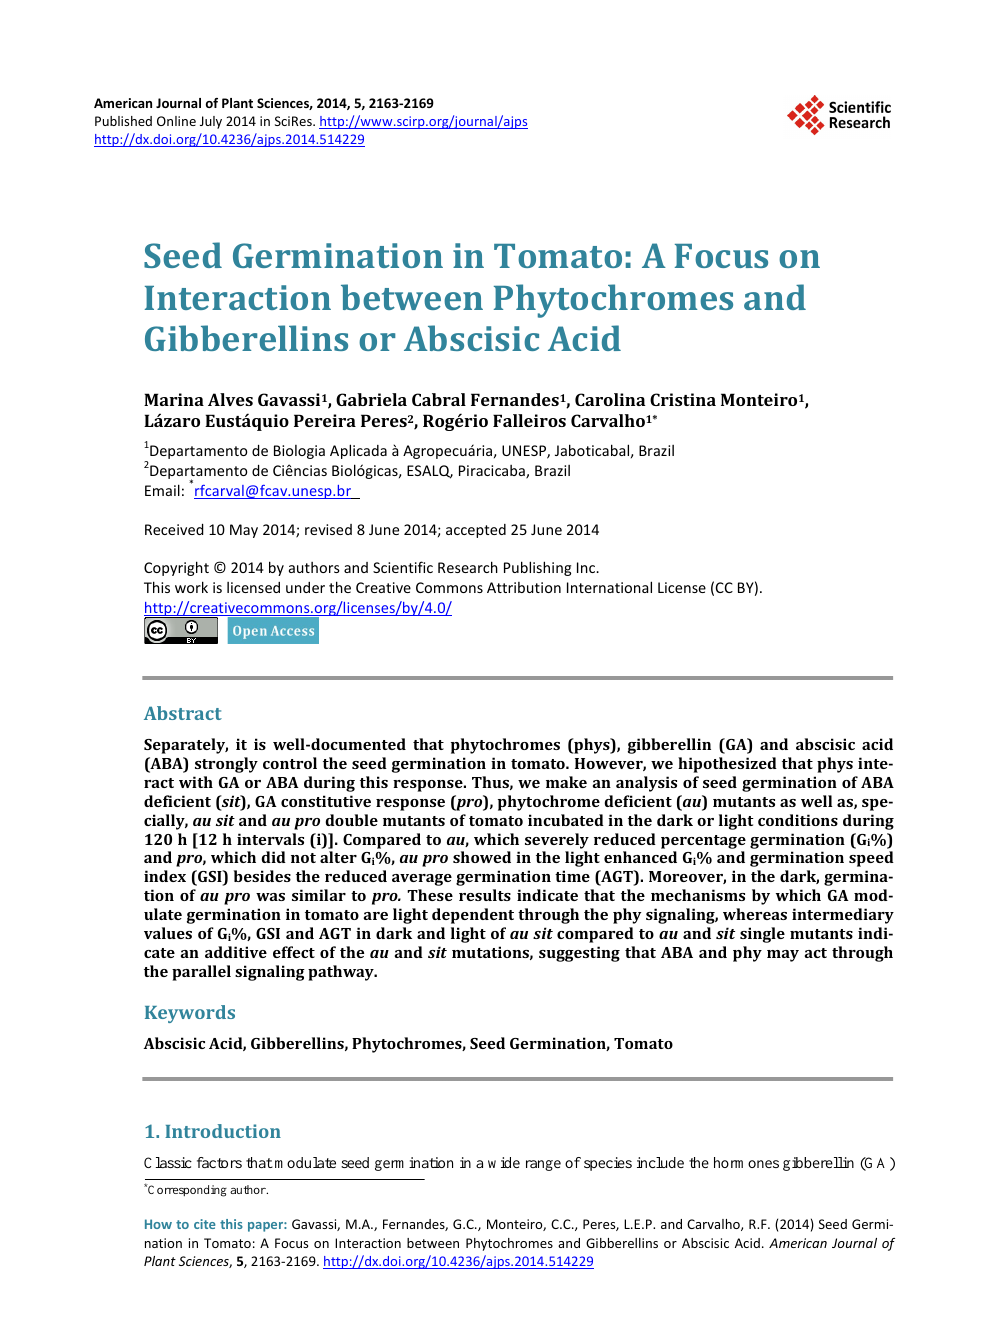 Seed Germination In Tomato A Focus On Interaction Between Phytochromes And Gibberellins Or Abscisic Acid Topic Of Research Paper In Biological Sciences Download Scholarly Article Pdf And Read For Free On